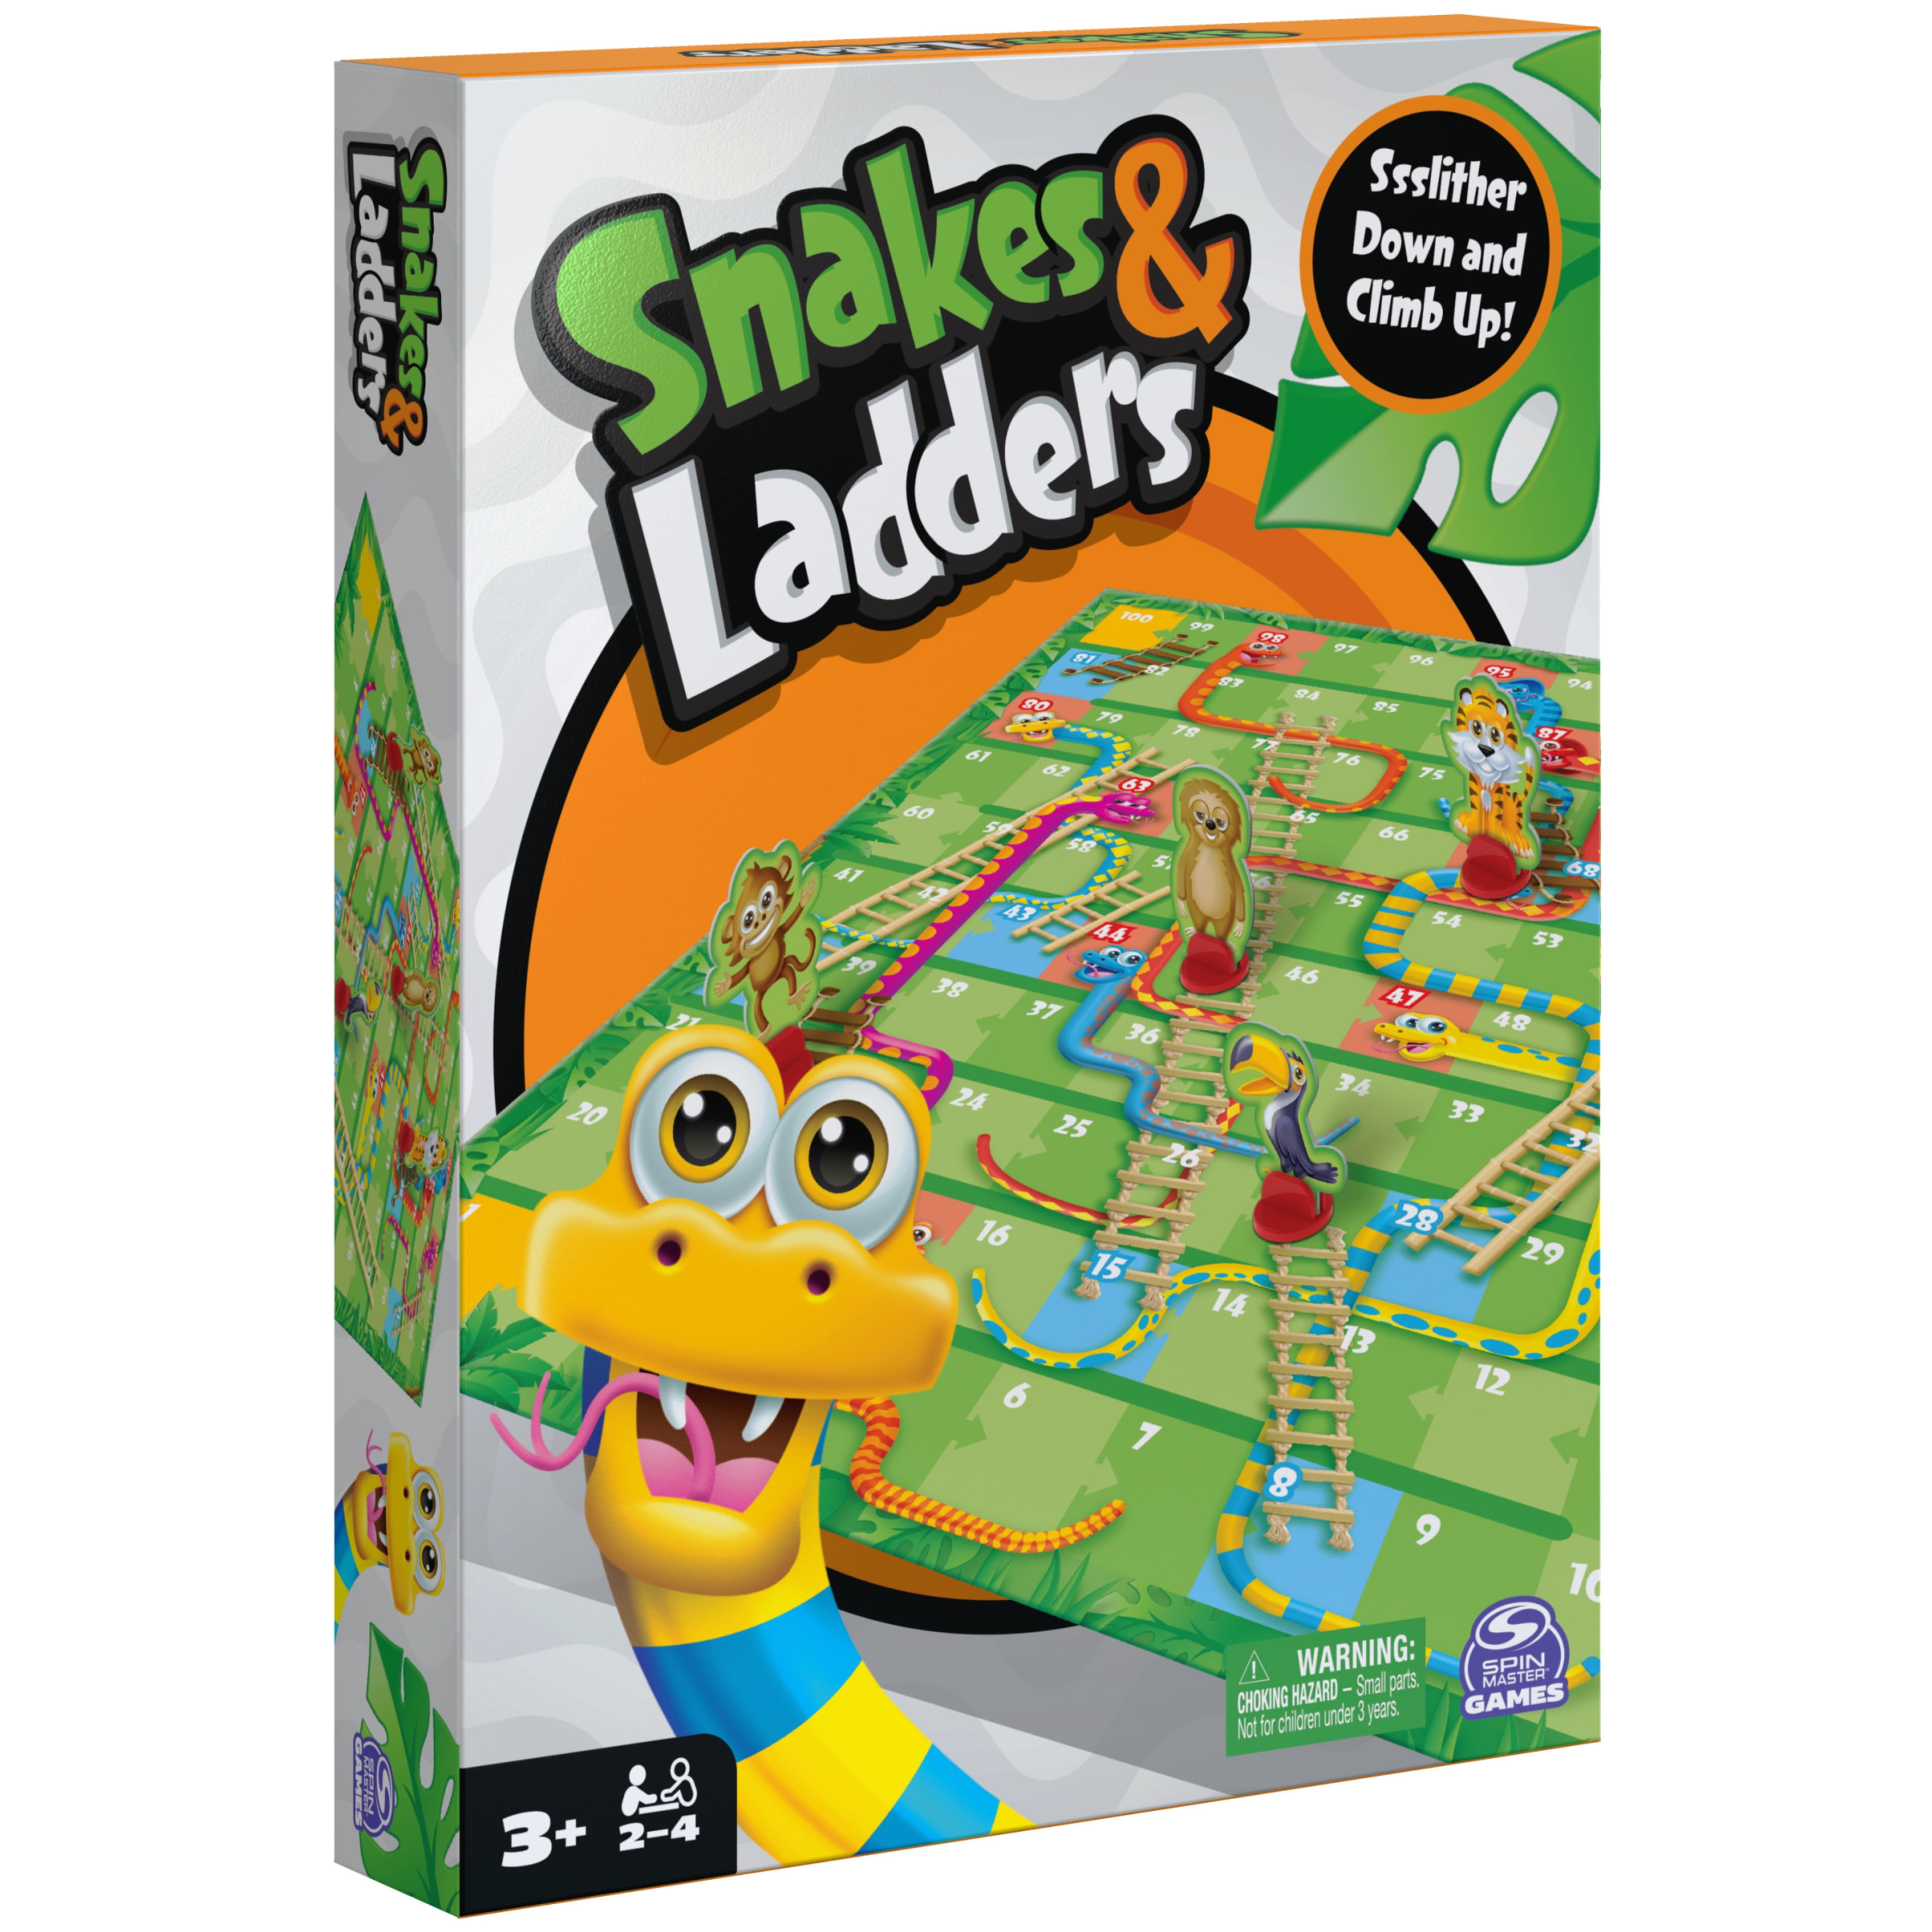 SNAKES AND LADDERS - Play Online for Free!